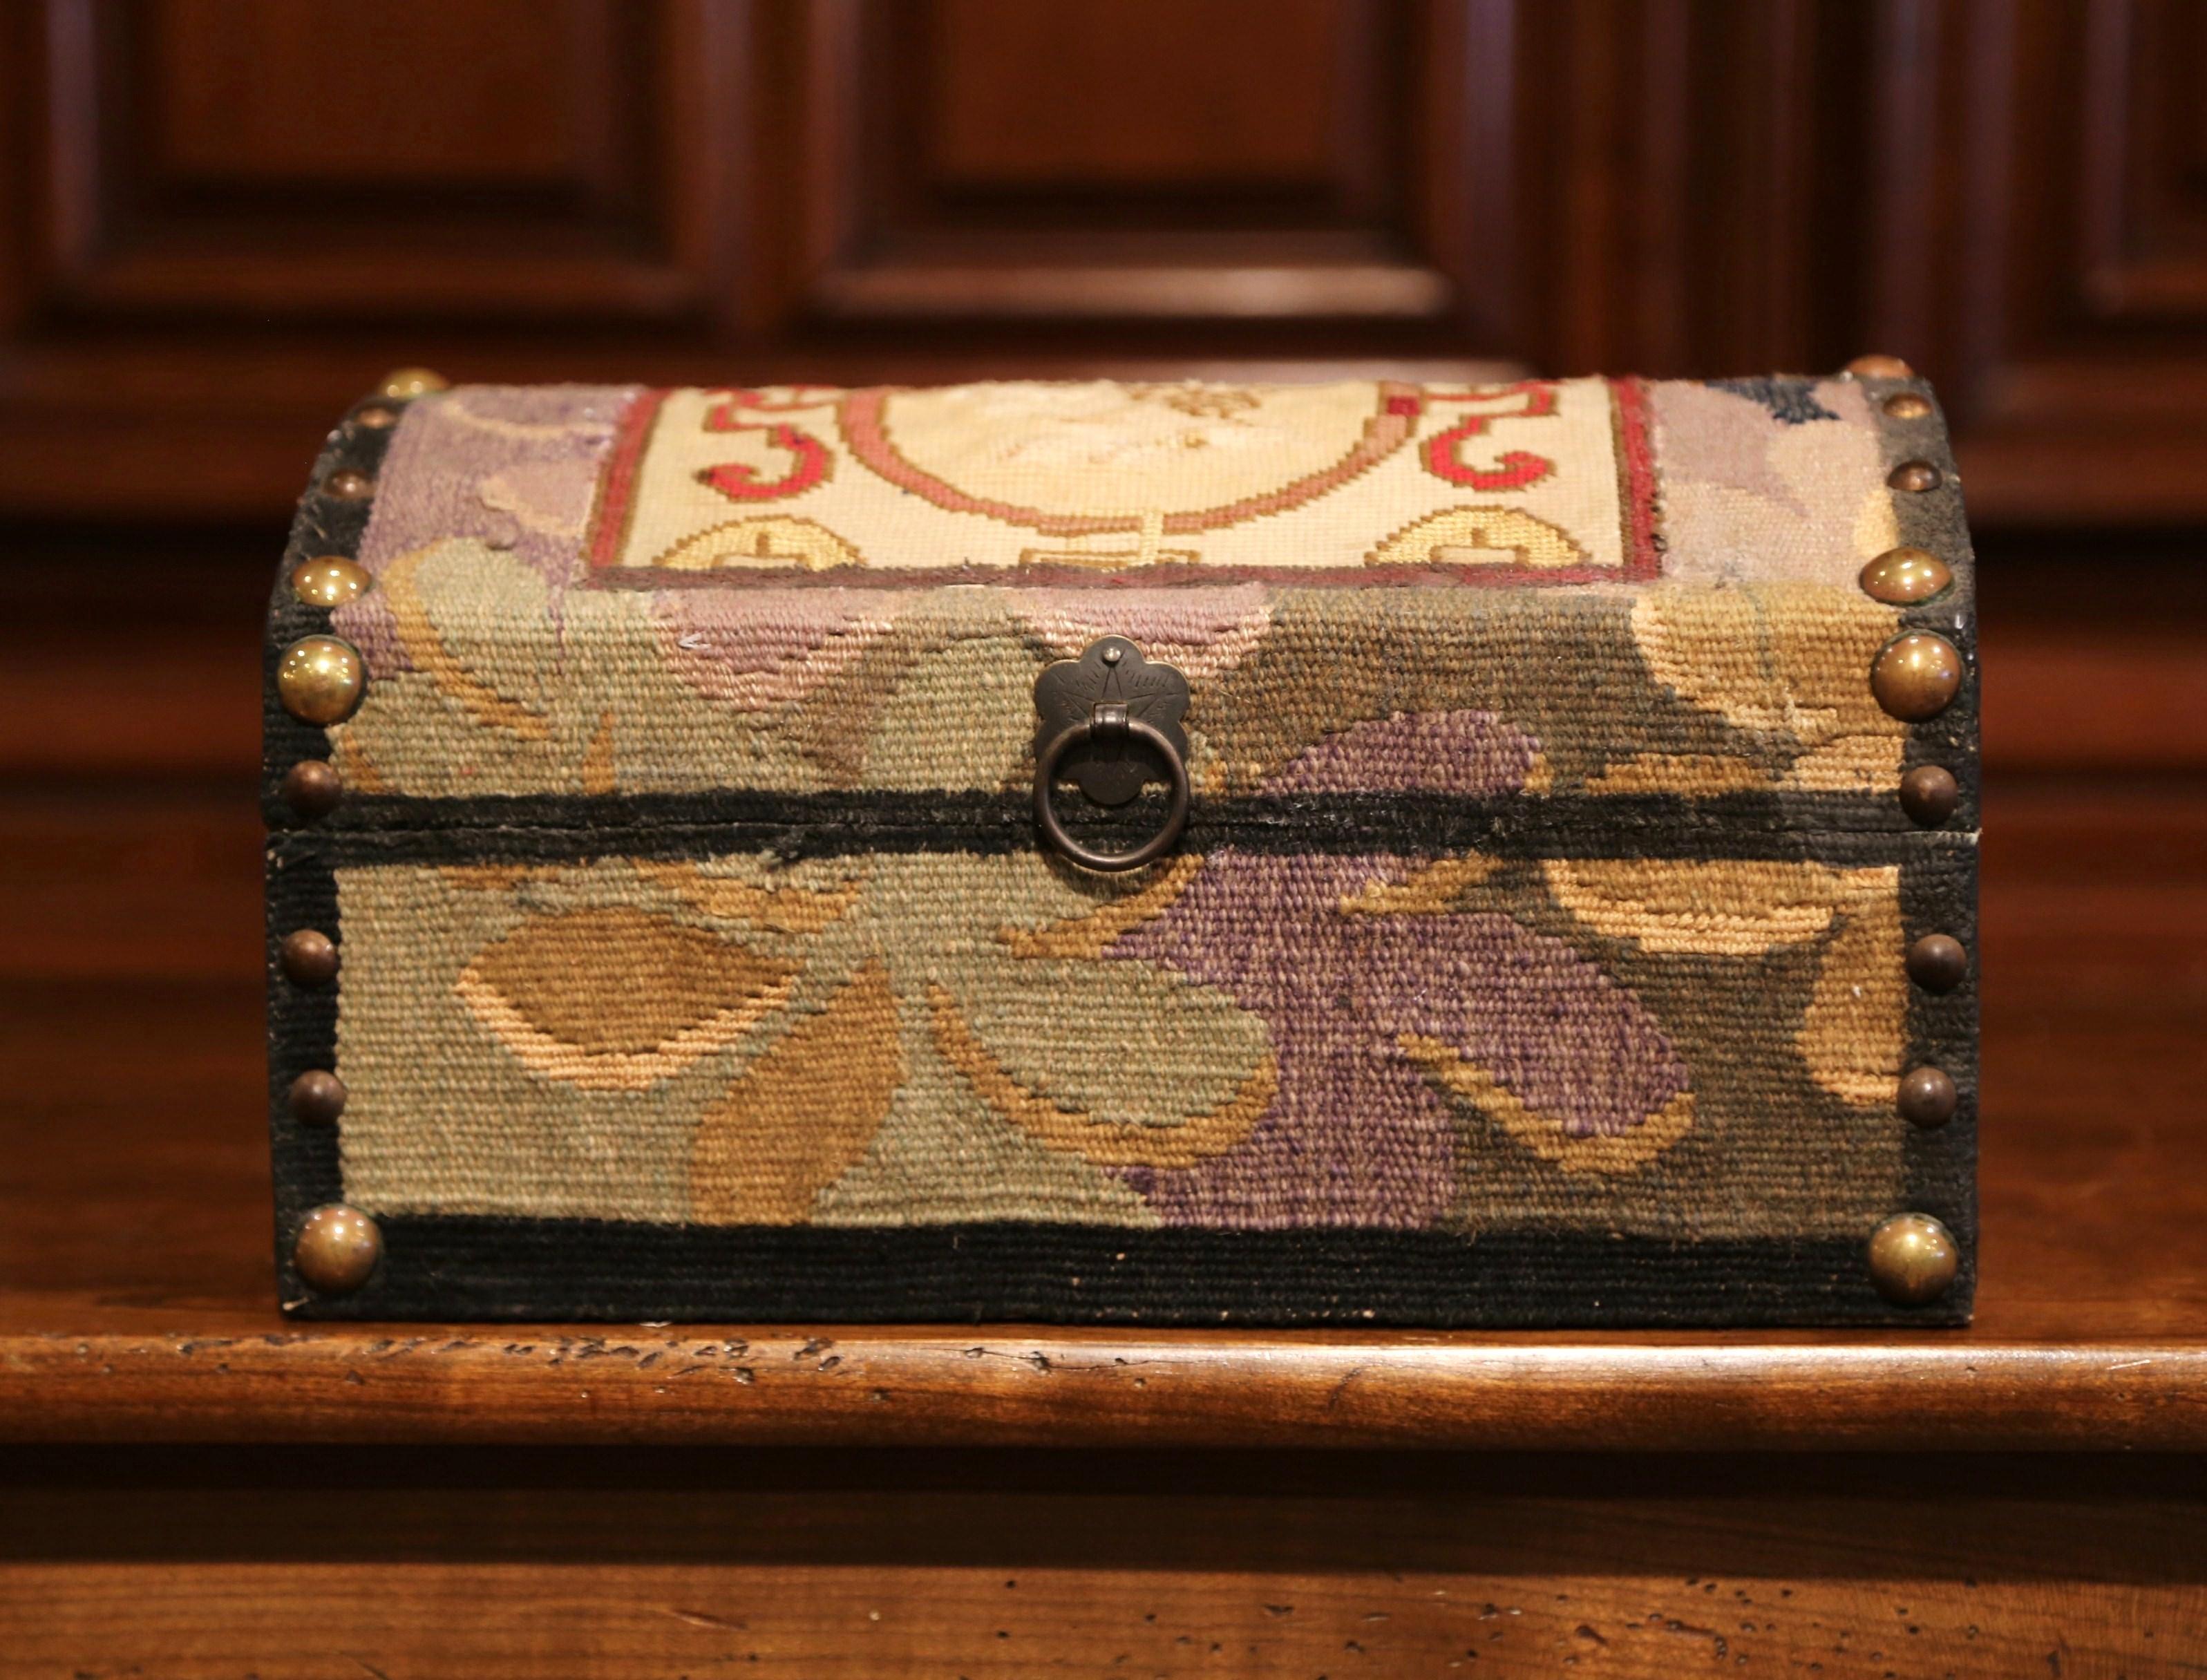 Place this decorative box on a coffee table to store your remote controls, or display it on a shelf. The box with bombe top, is upholstered with antique needlepoint tapestry fragments and embellished with brass nail heads and brass pull. The